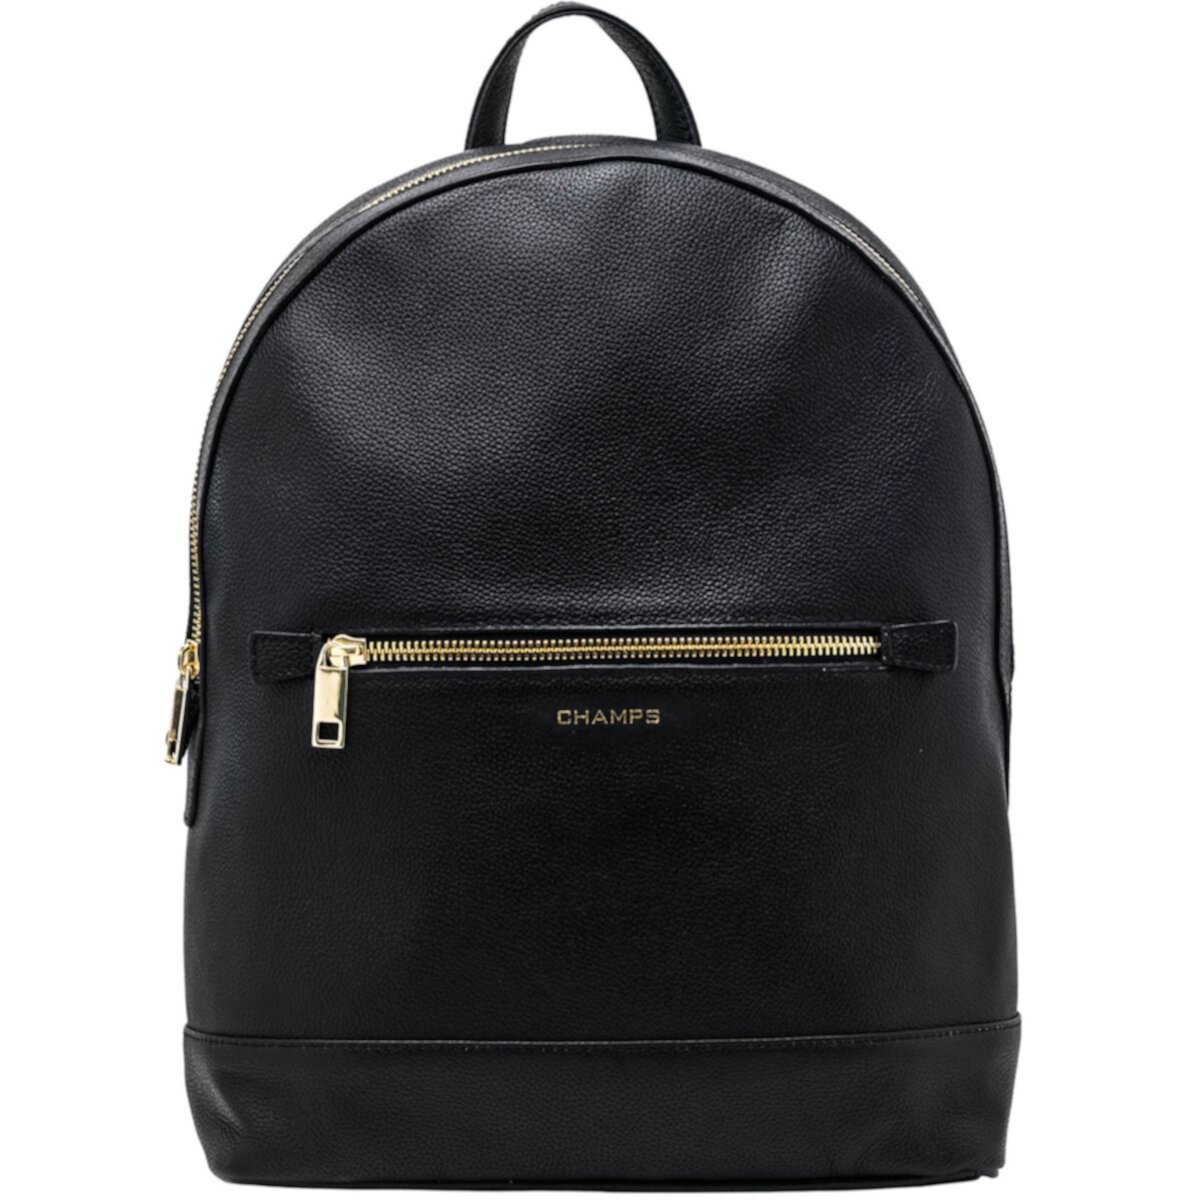 Champs Gala Collection Leather Backpack CHAMPS